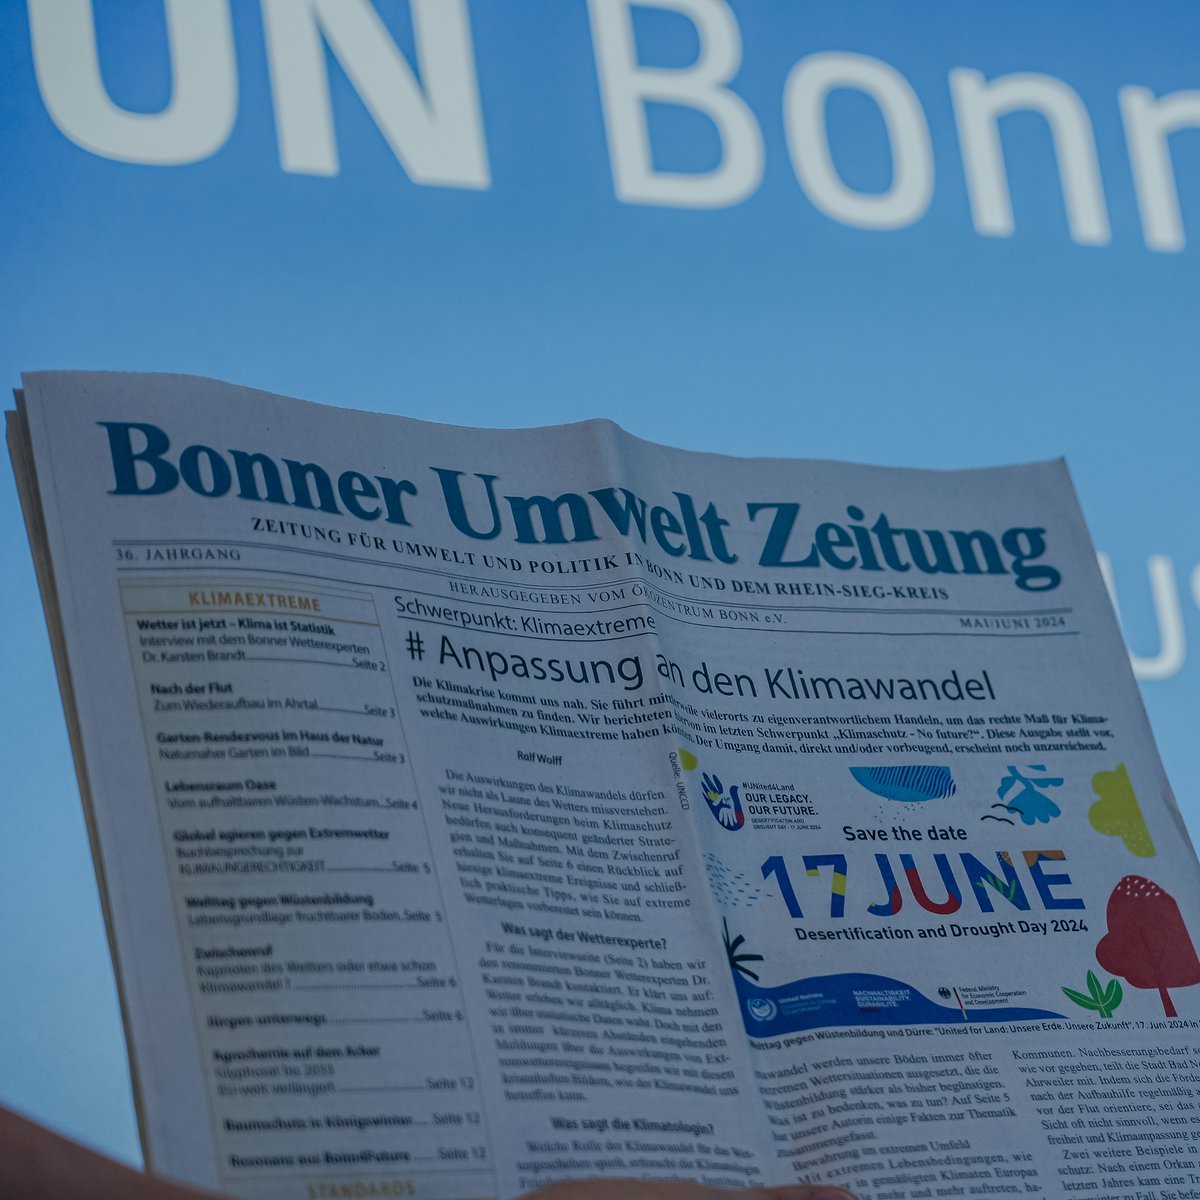 📰 We are in the papers! #DesertificationandDroughtDay is making headlines in @BonnGlobal, the host city for this year's global observance that marks the the 30th anniversary UNCCD on 17 June. A pivotal moment for environmental action under the leadership of #Germany @BMZ_Bund